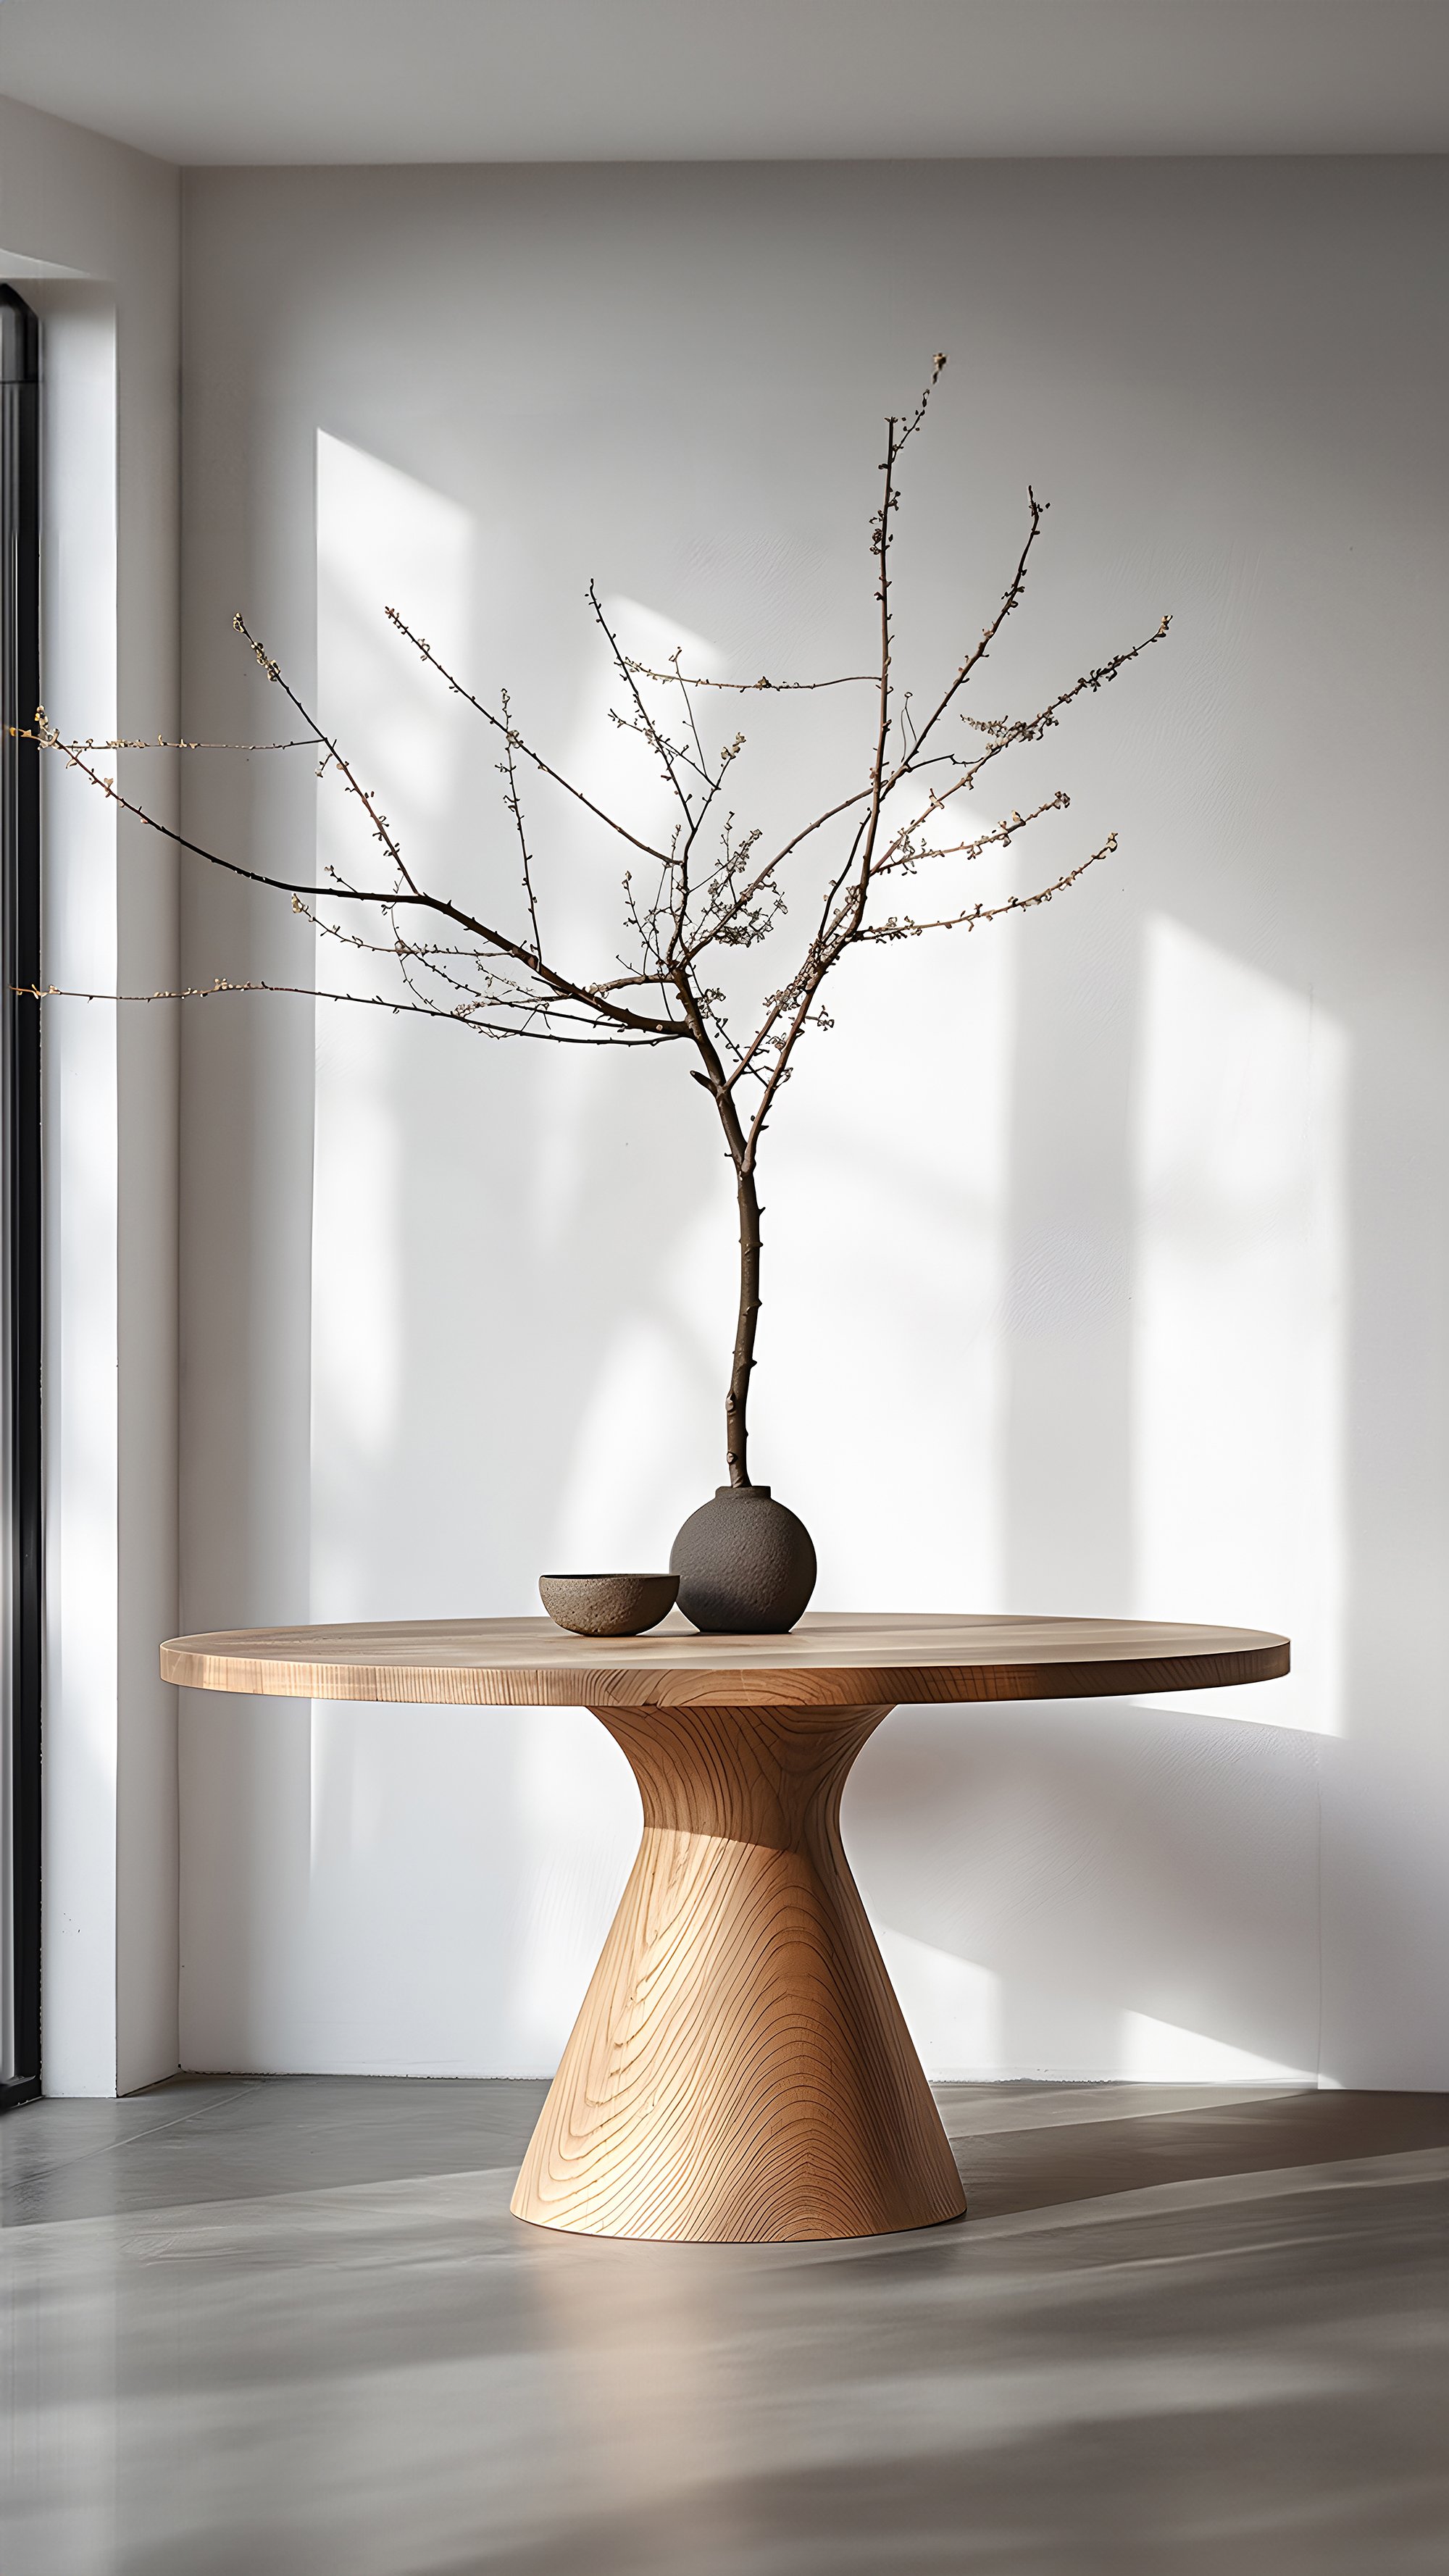 NONO's Socle Series No03, Cocktail Tables with a Wooden Twist - 9.jpg